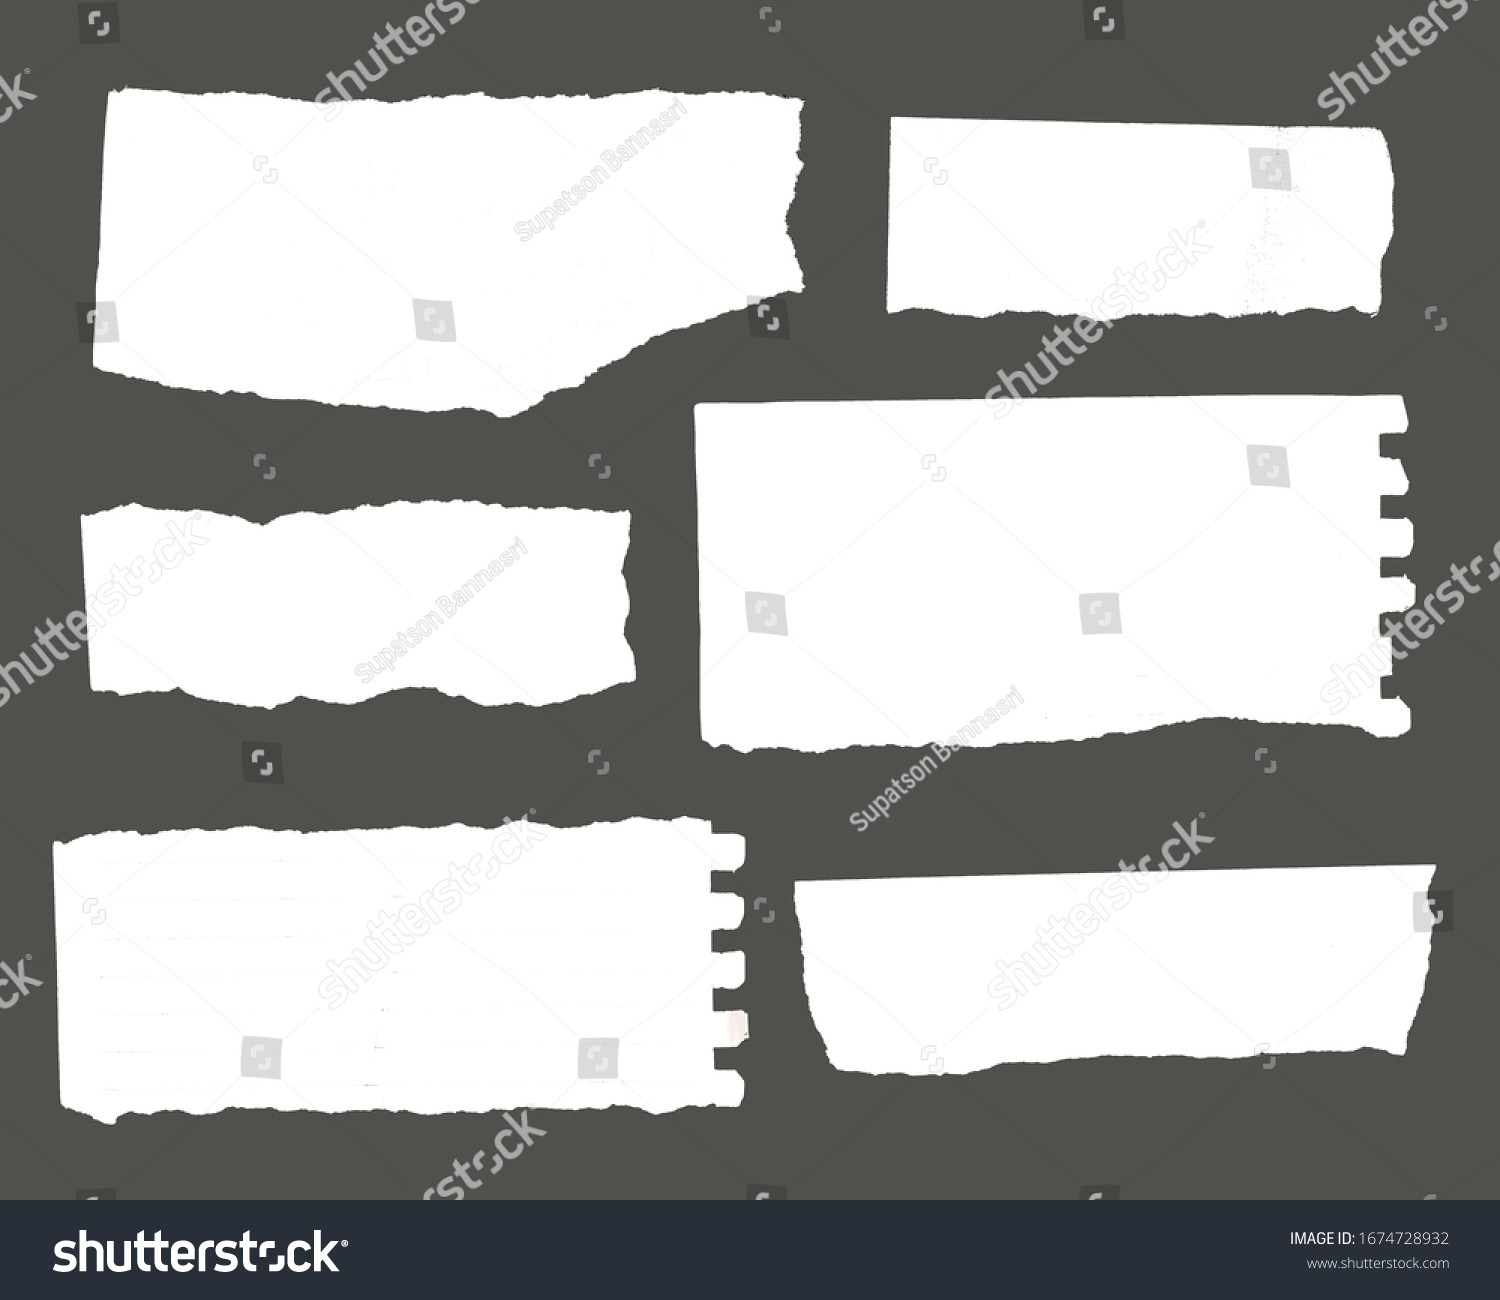 White torn paper tears pieces collection isolated with soft shadows realistic vector illustration #1674728932